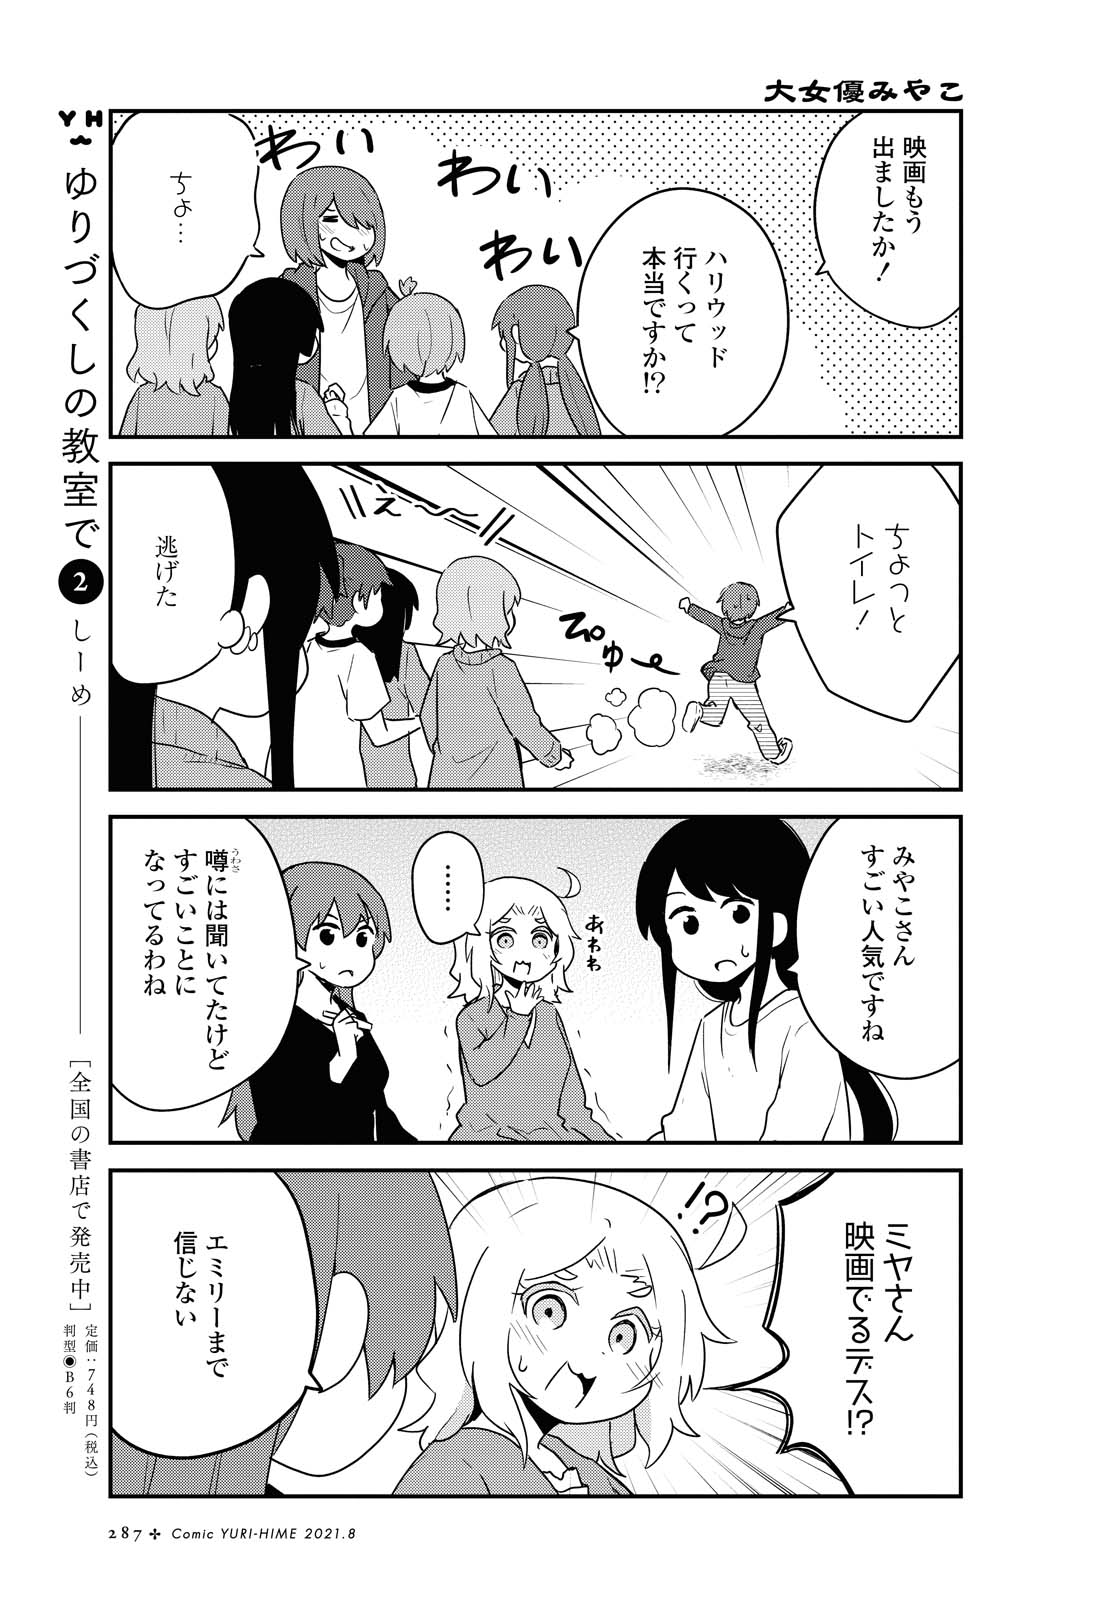 Wataten! An Angel Flew Down to Me 私に天使が舞い降りた！ 第84話 - Page 3